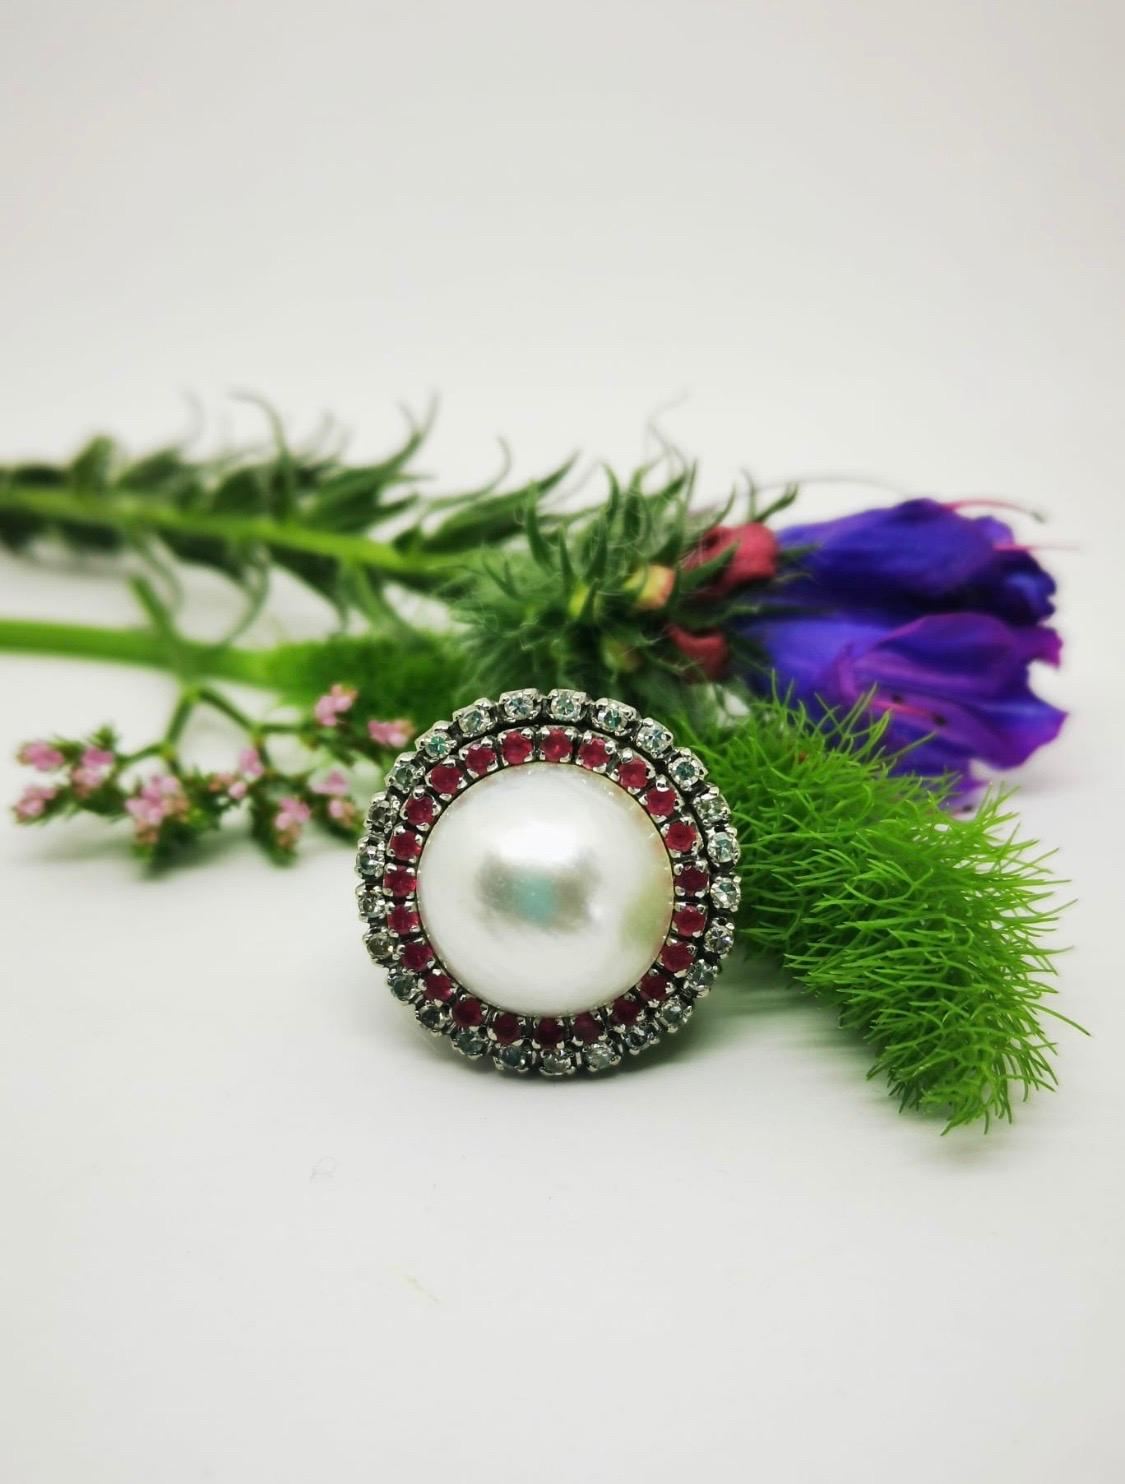 Vintage Pearl, Rubies and  Diamonds Ring

This classic elegant vintage 18k white gold ring with a very beautiful pearl Mabe 15mm diameter surrounded by 23 rubies and 25 diamonds.
Top is the ring measures 22mm by 22mm and shank measures 2mm.

Size